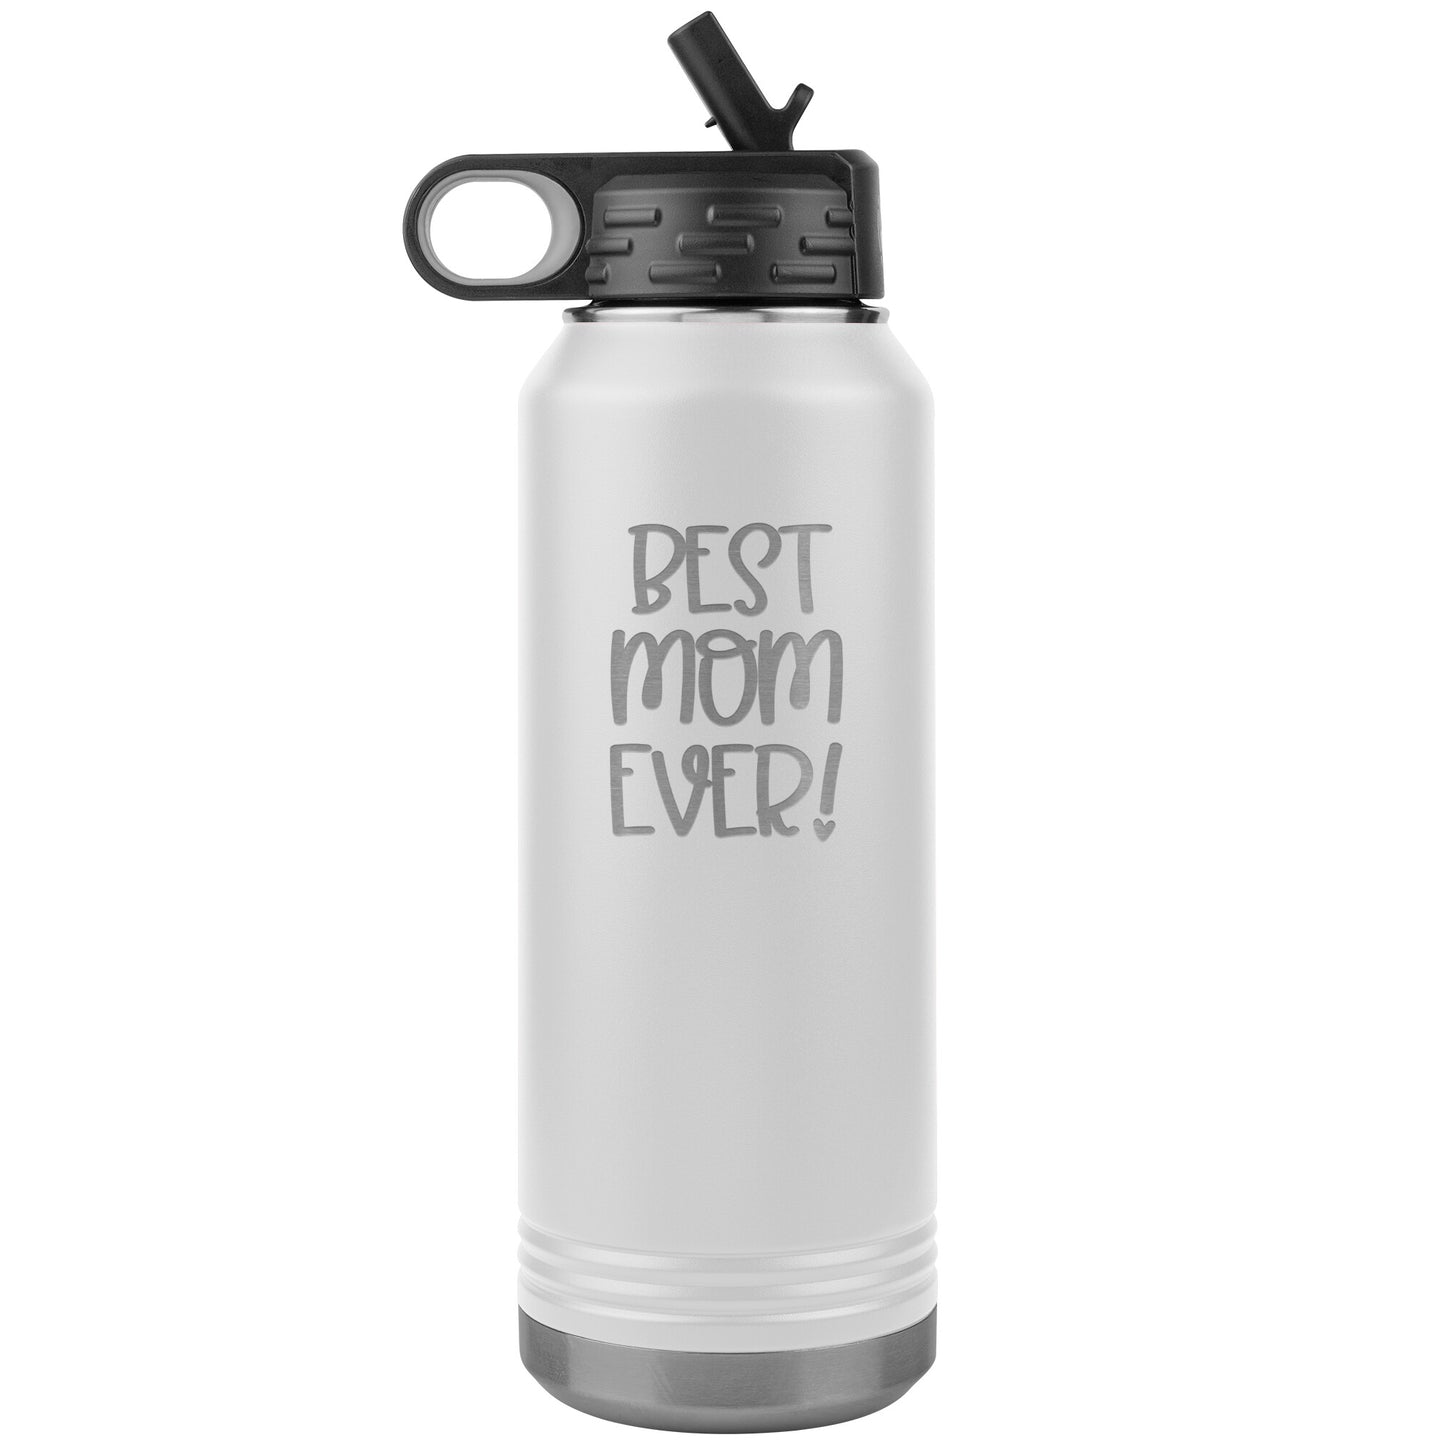 "Best Mom Ever" 32 oz. Reusable Travel Bottle with Flip Top Lid & Built-in Straw